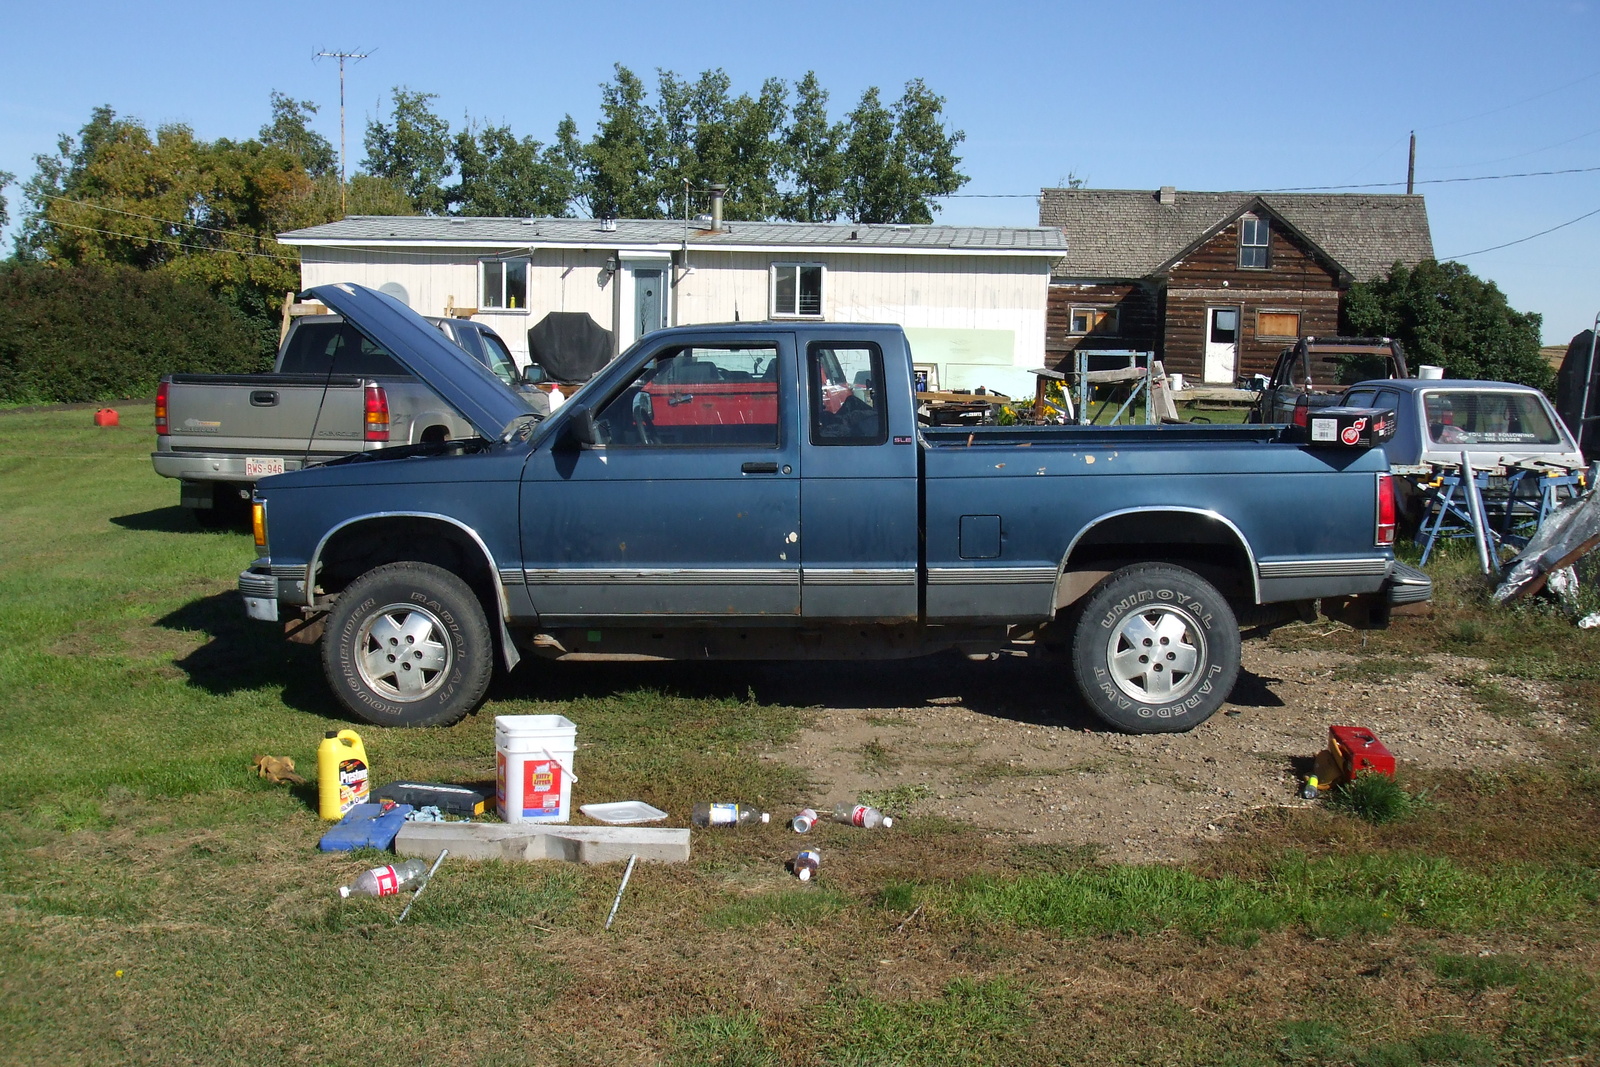 1991 Gmc sonoma extended cab #4